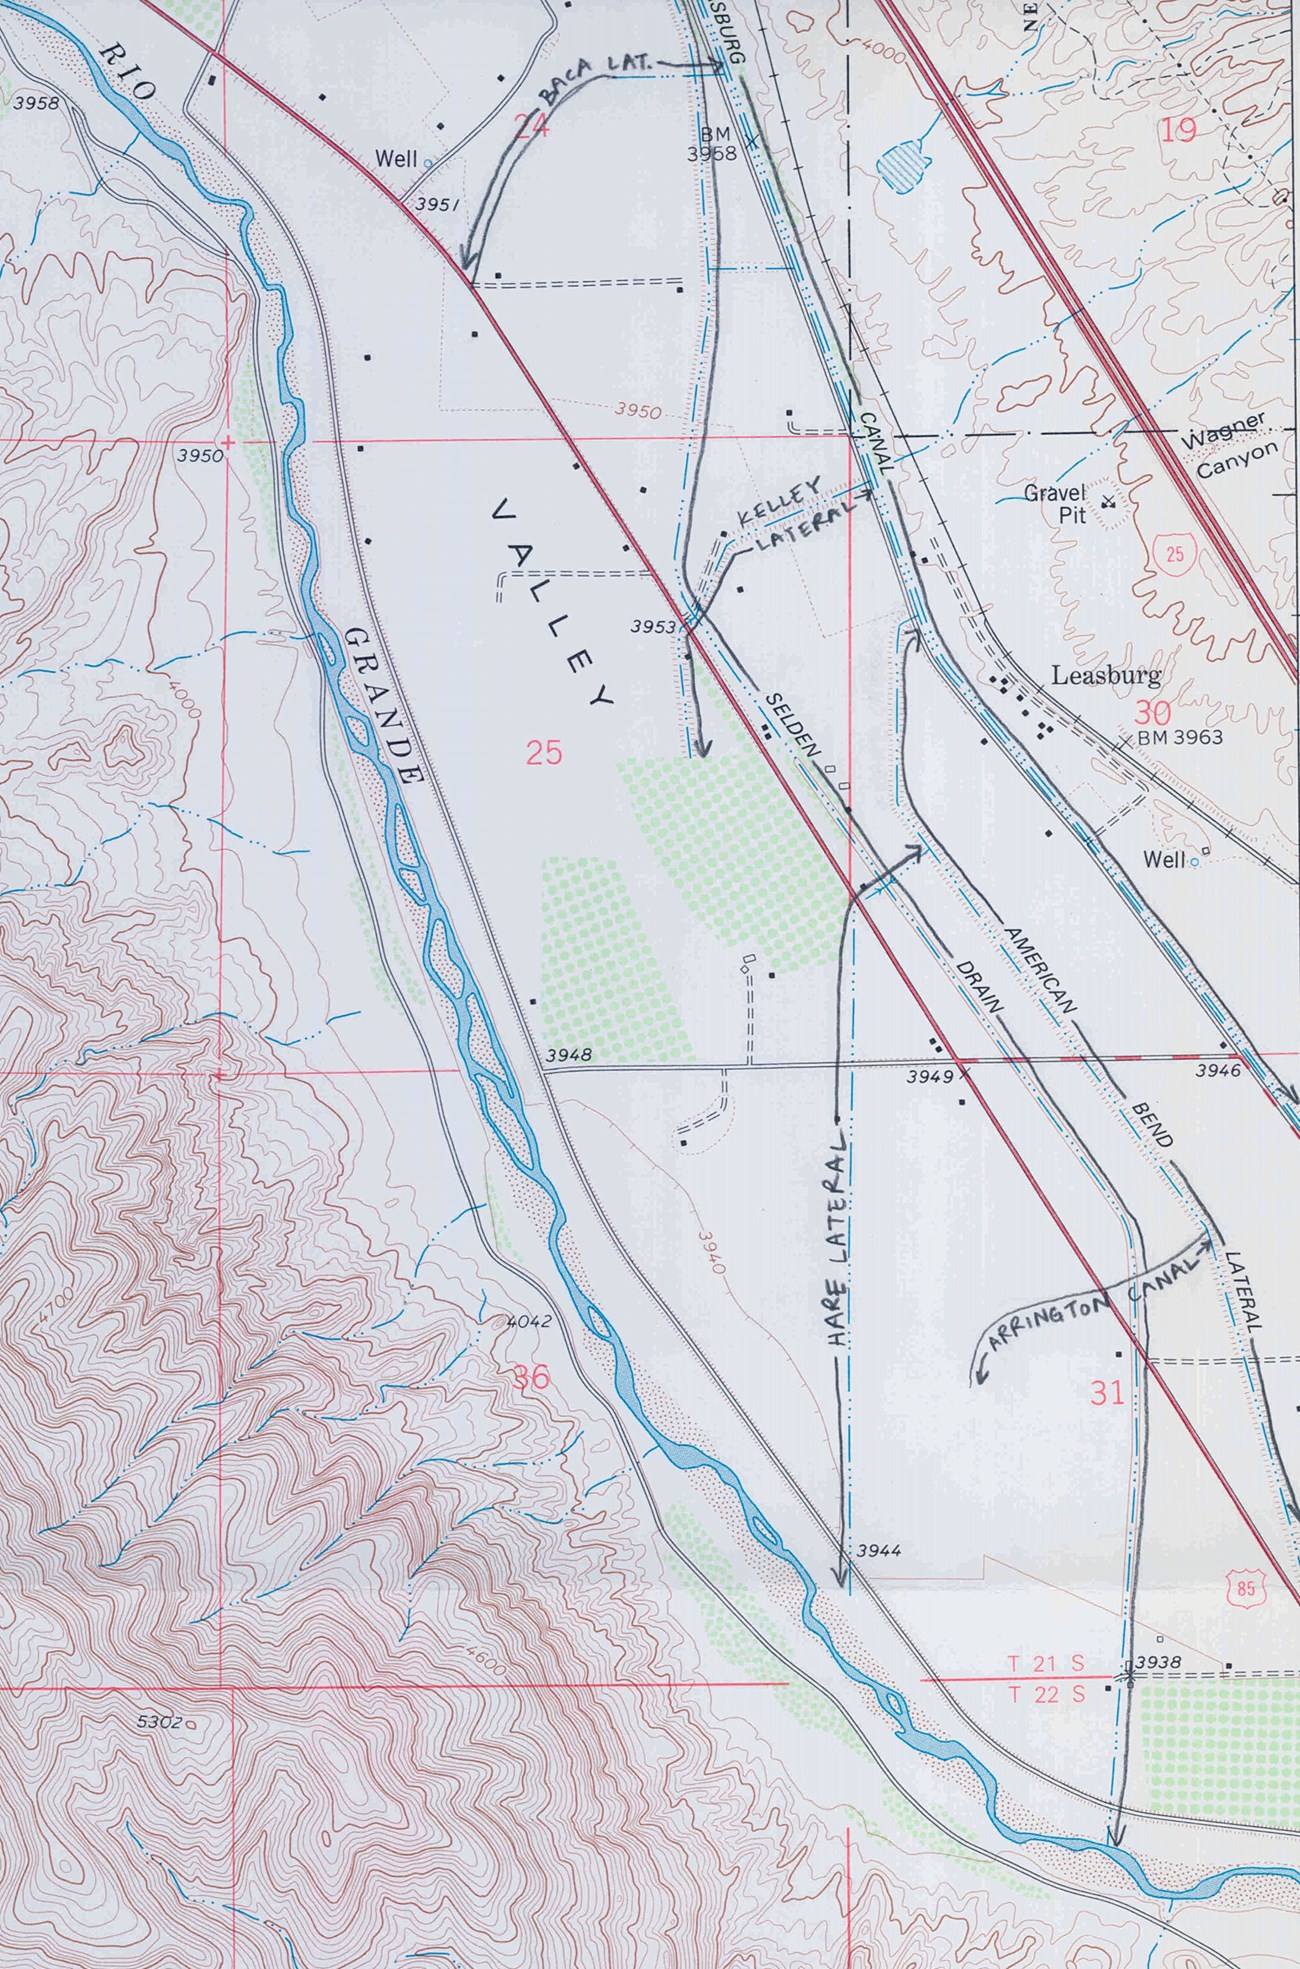 (Elephant Butte Irrigation District [Doña Ana County, New Mexico] National Register Nomination)